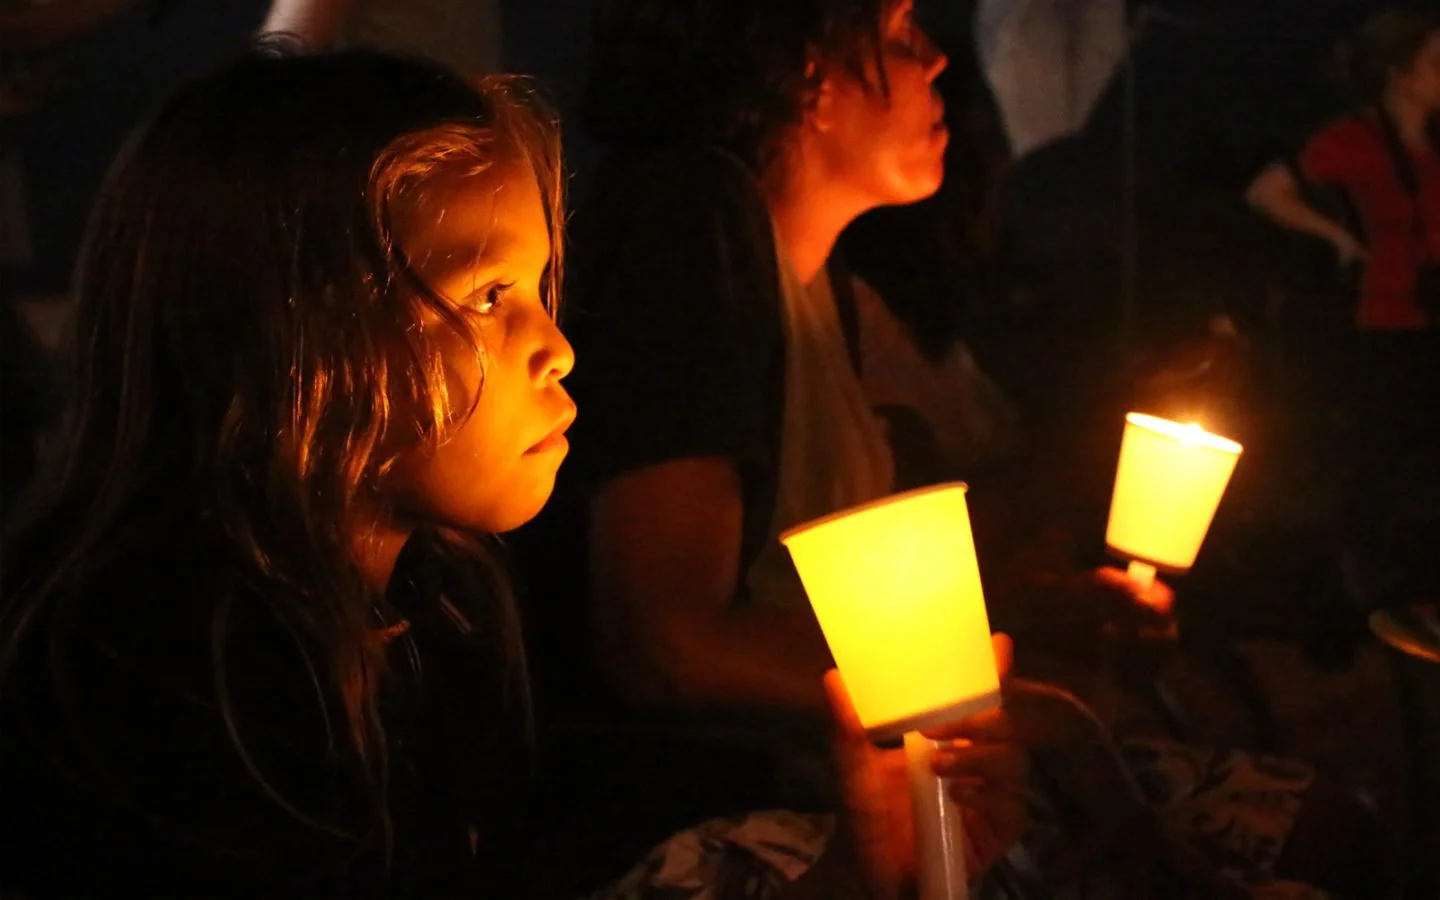 An Aboriginal girl holds a lantern in the dark, another girl sits beside her